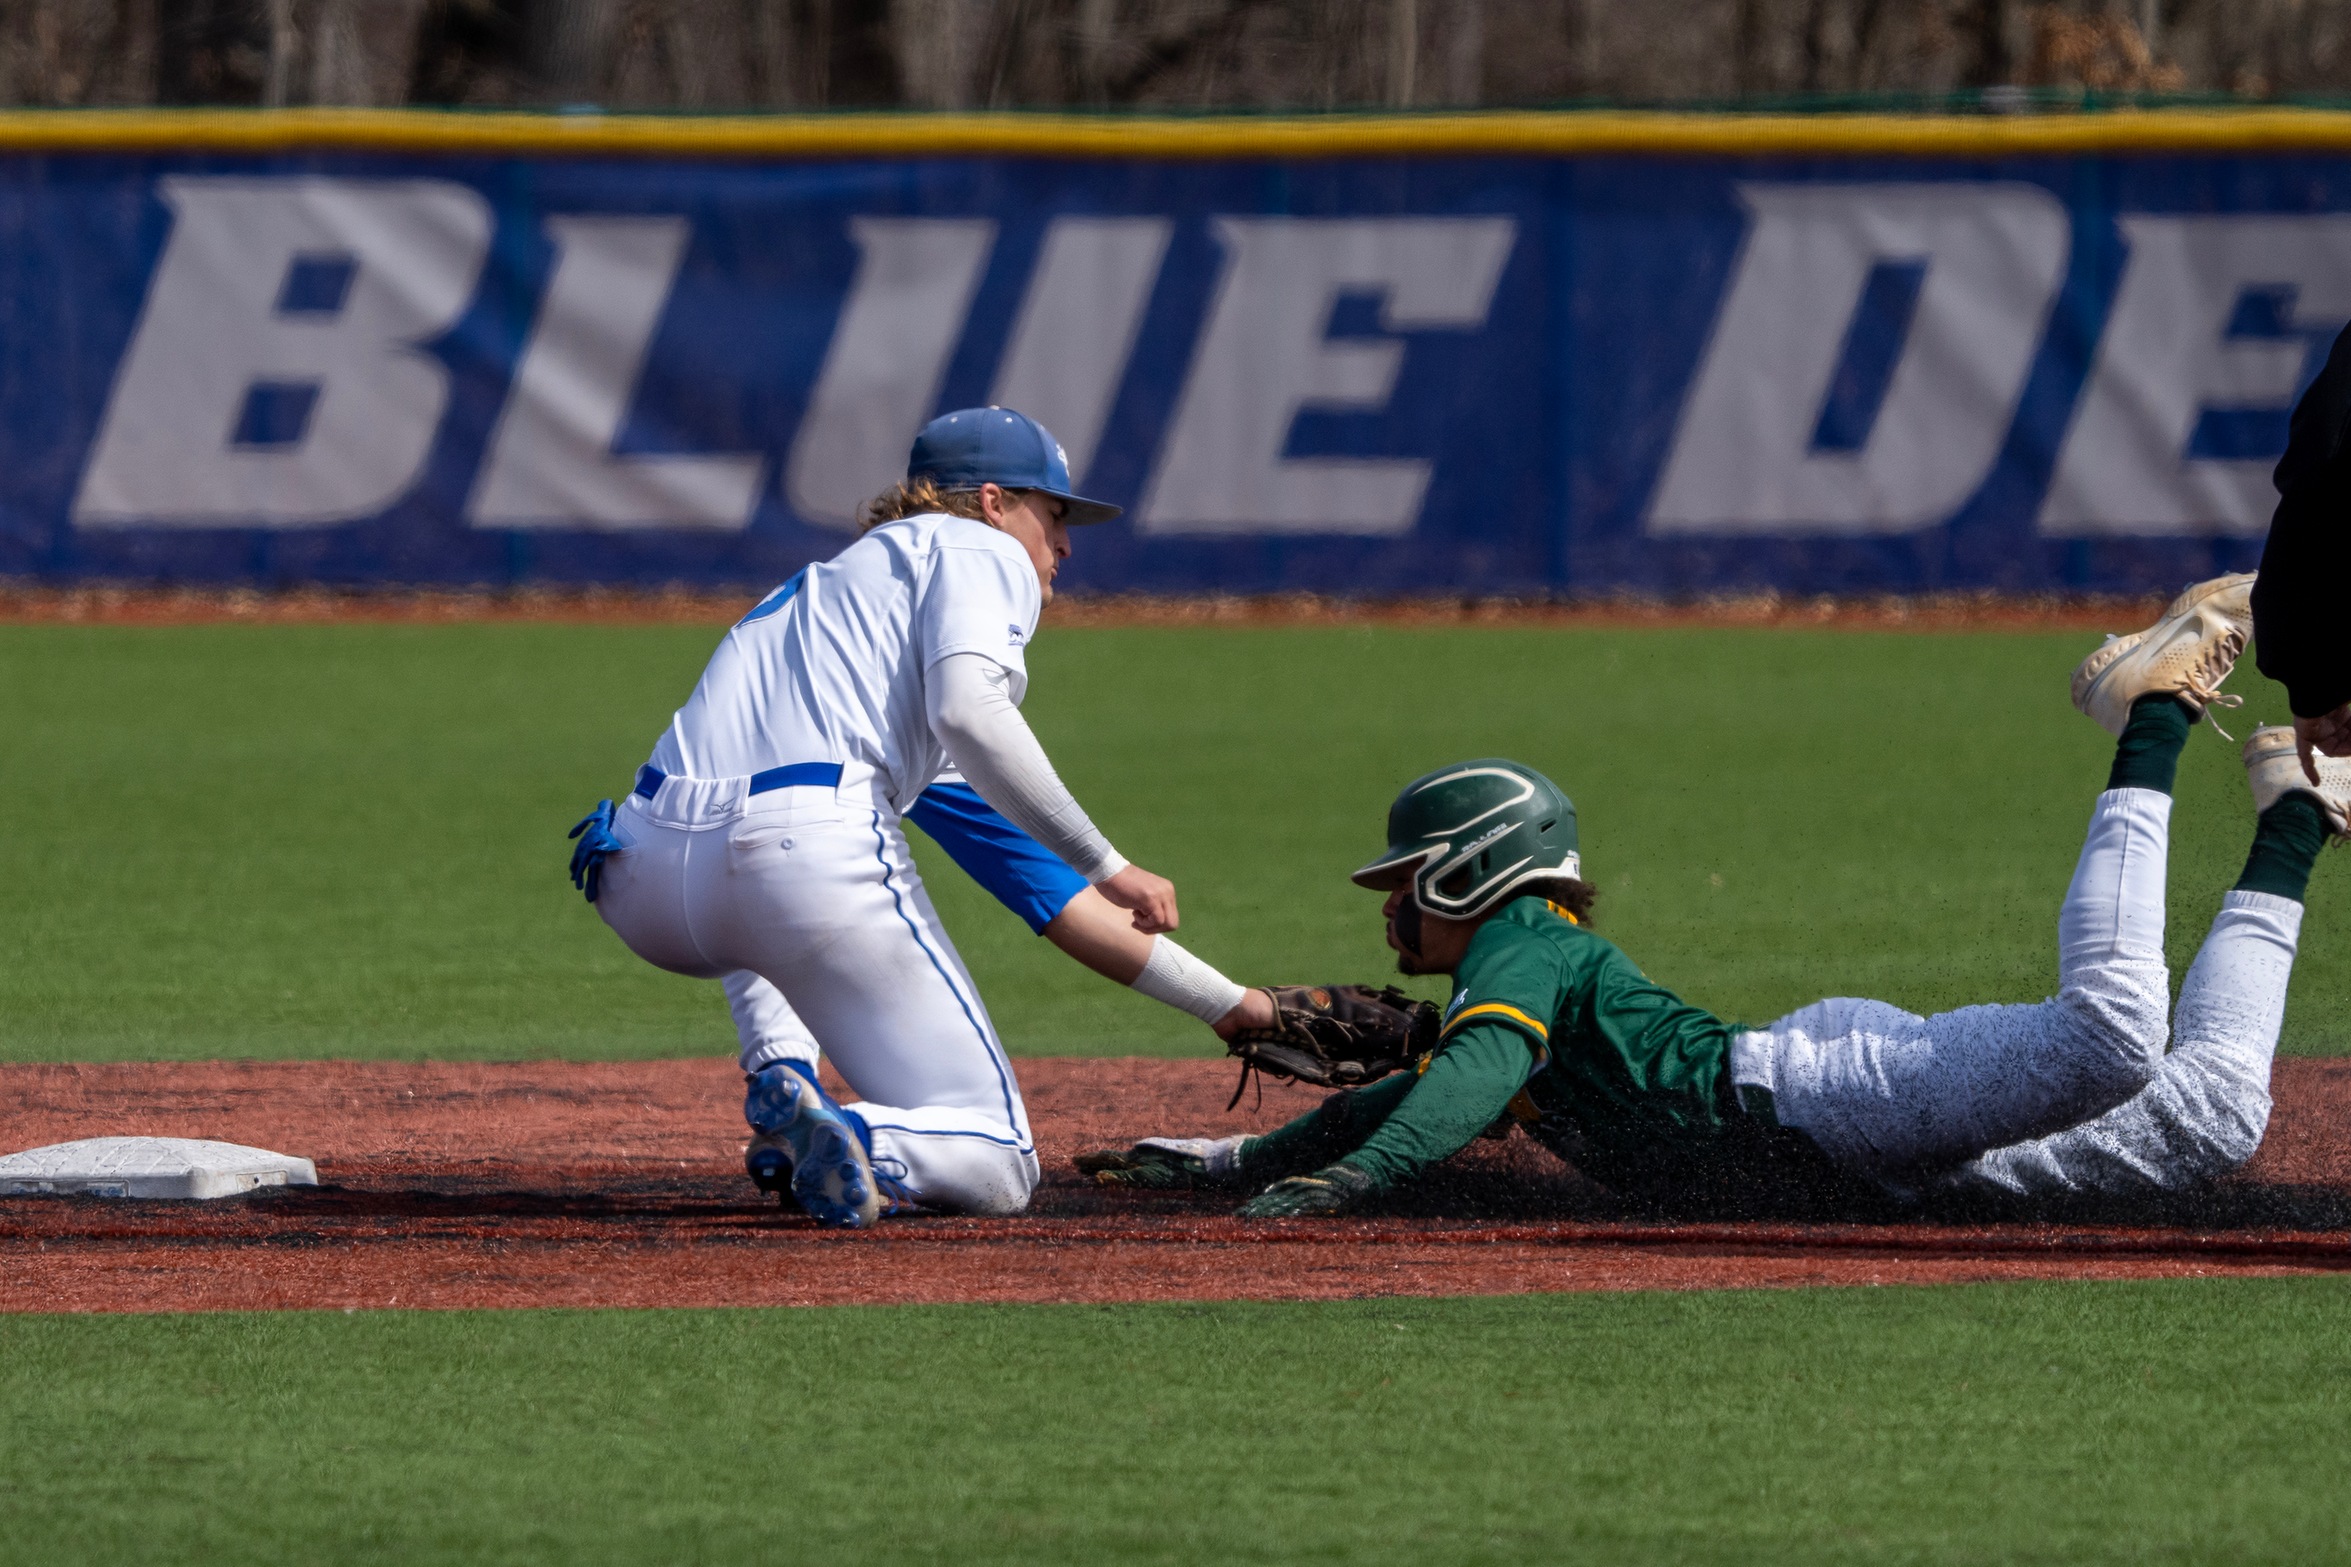 Elliot Good and CCSU swept Norfolk State to open a three-game NEC series (Steve McLaughlin Photography)